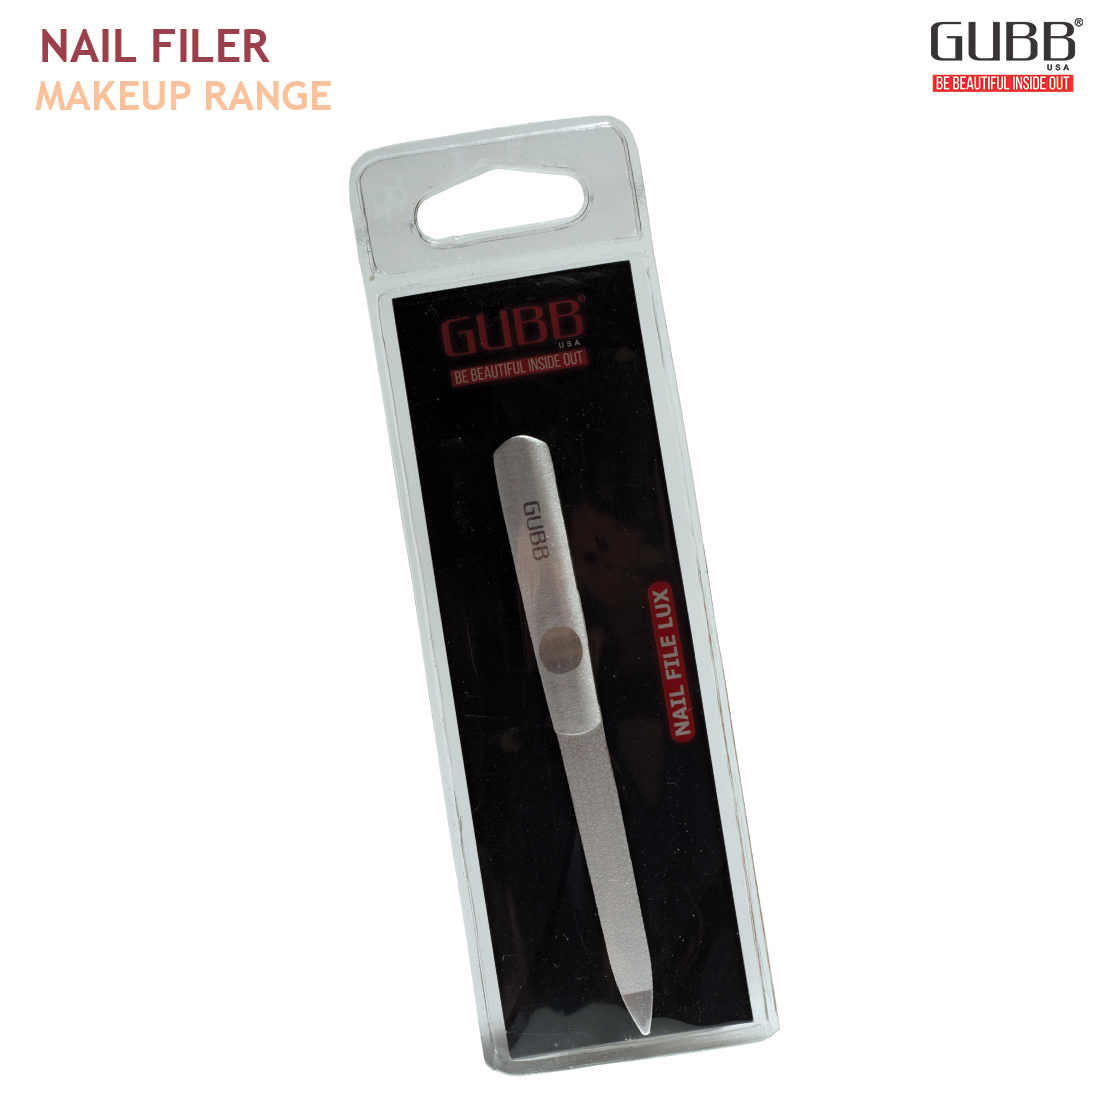 NAIL FILE LUX